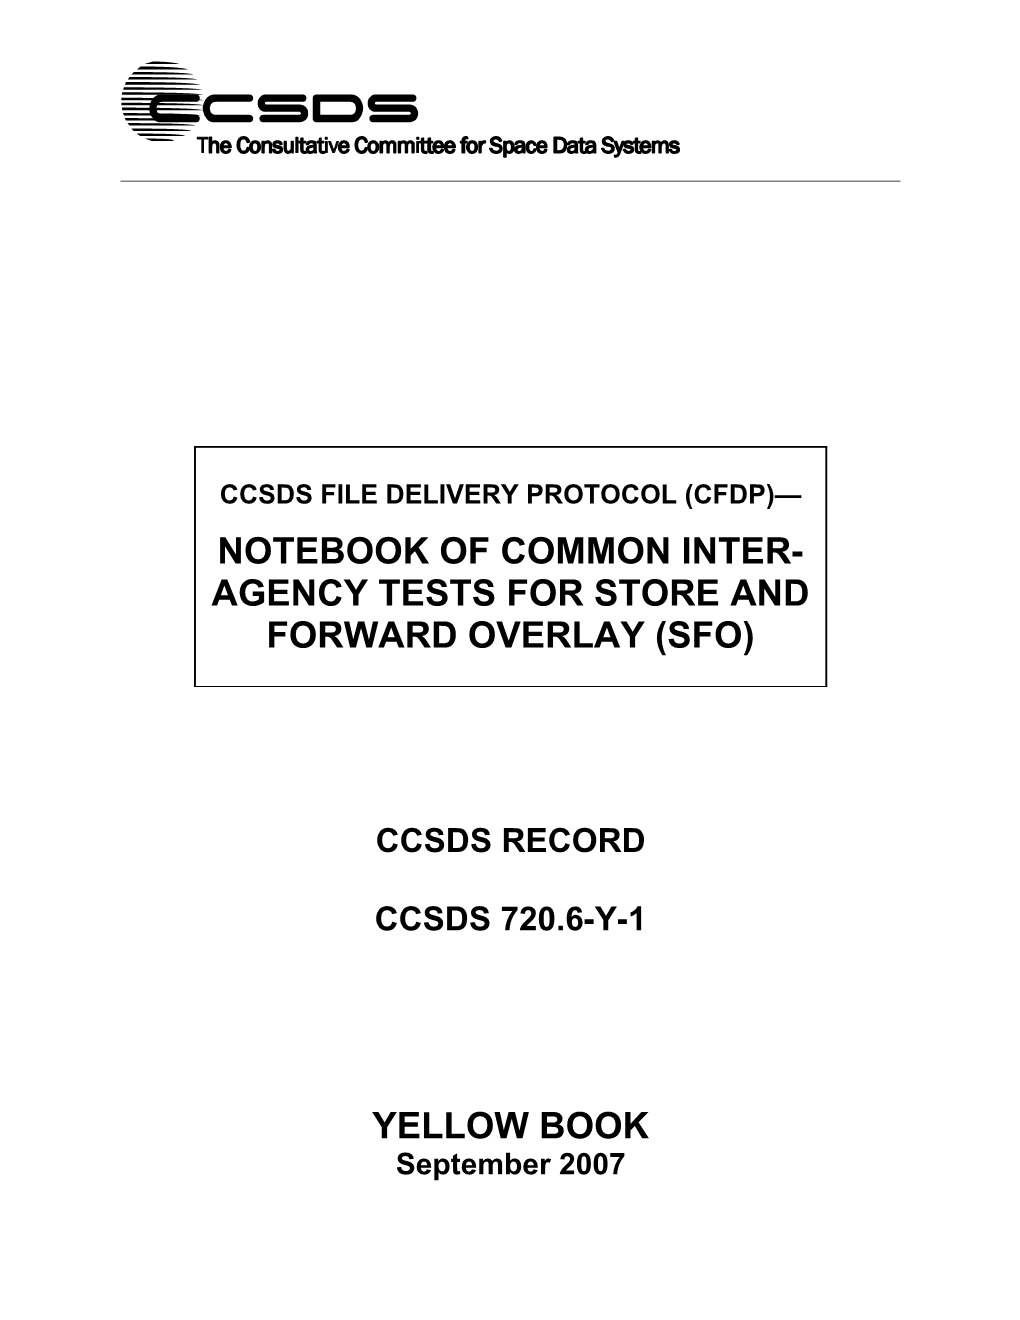 CCSDS File Delivery Protocol (CFDP) Notebook of Common Inter-Agency Tests for Store And